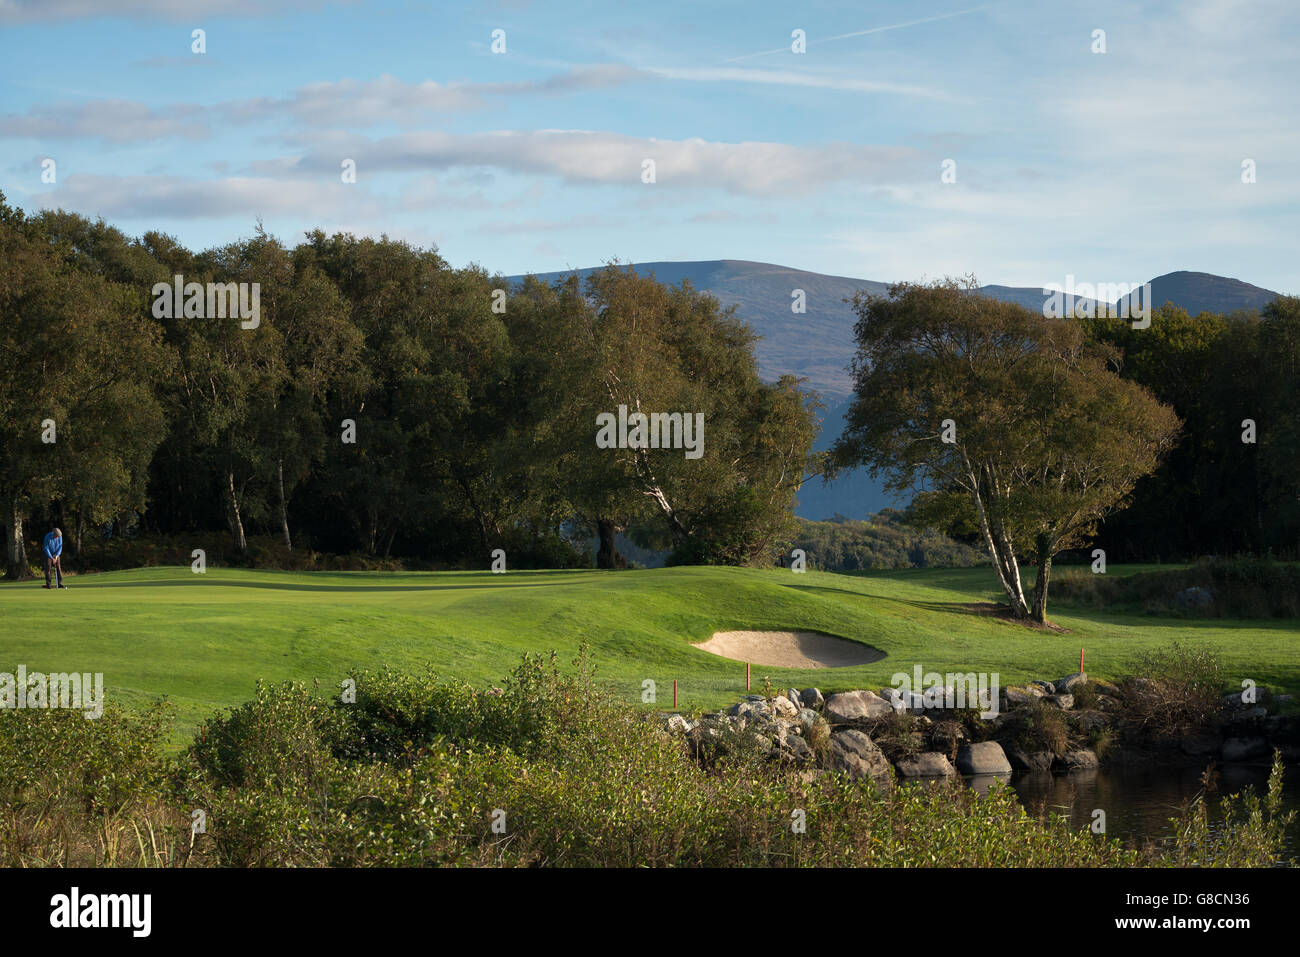 Lone golfer playing golf at the scenic and picturesque Killarney golf and fishing club in Fossa, Killarney National Park, County Kerry, Ireland Stock Photo